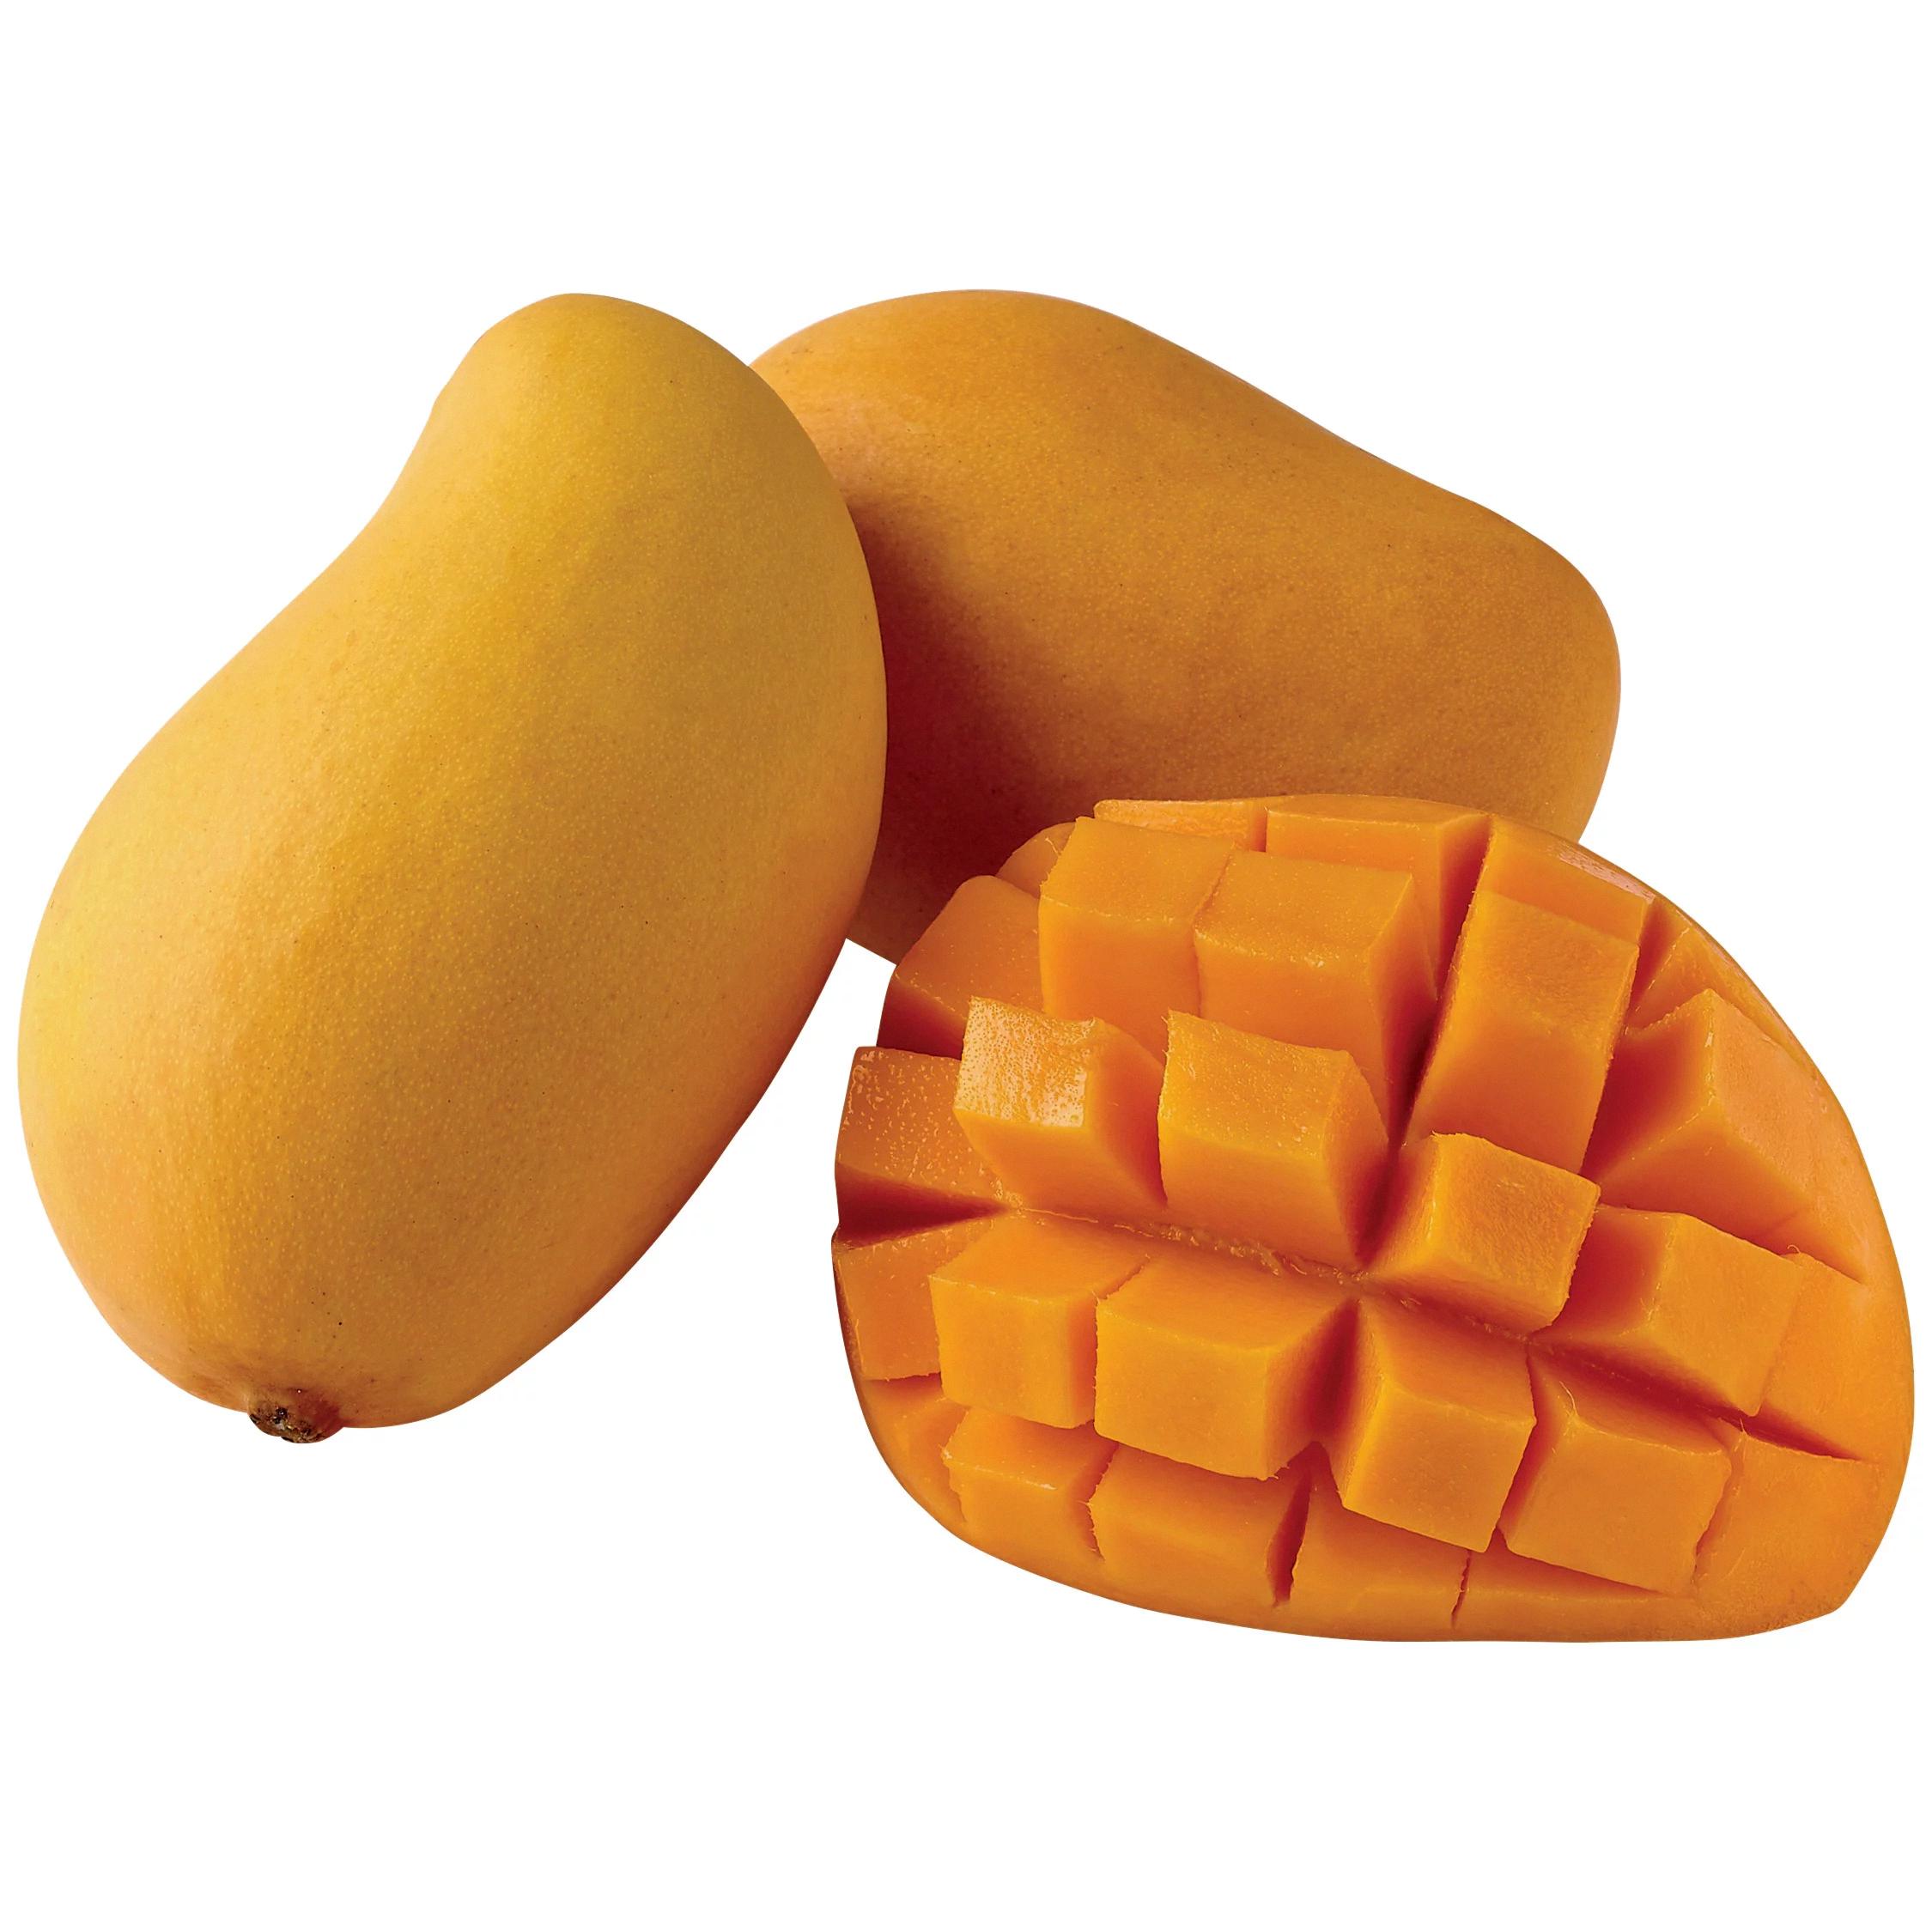 do mangoes have pits